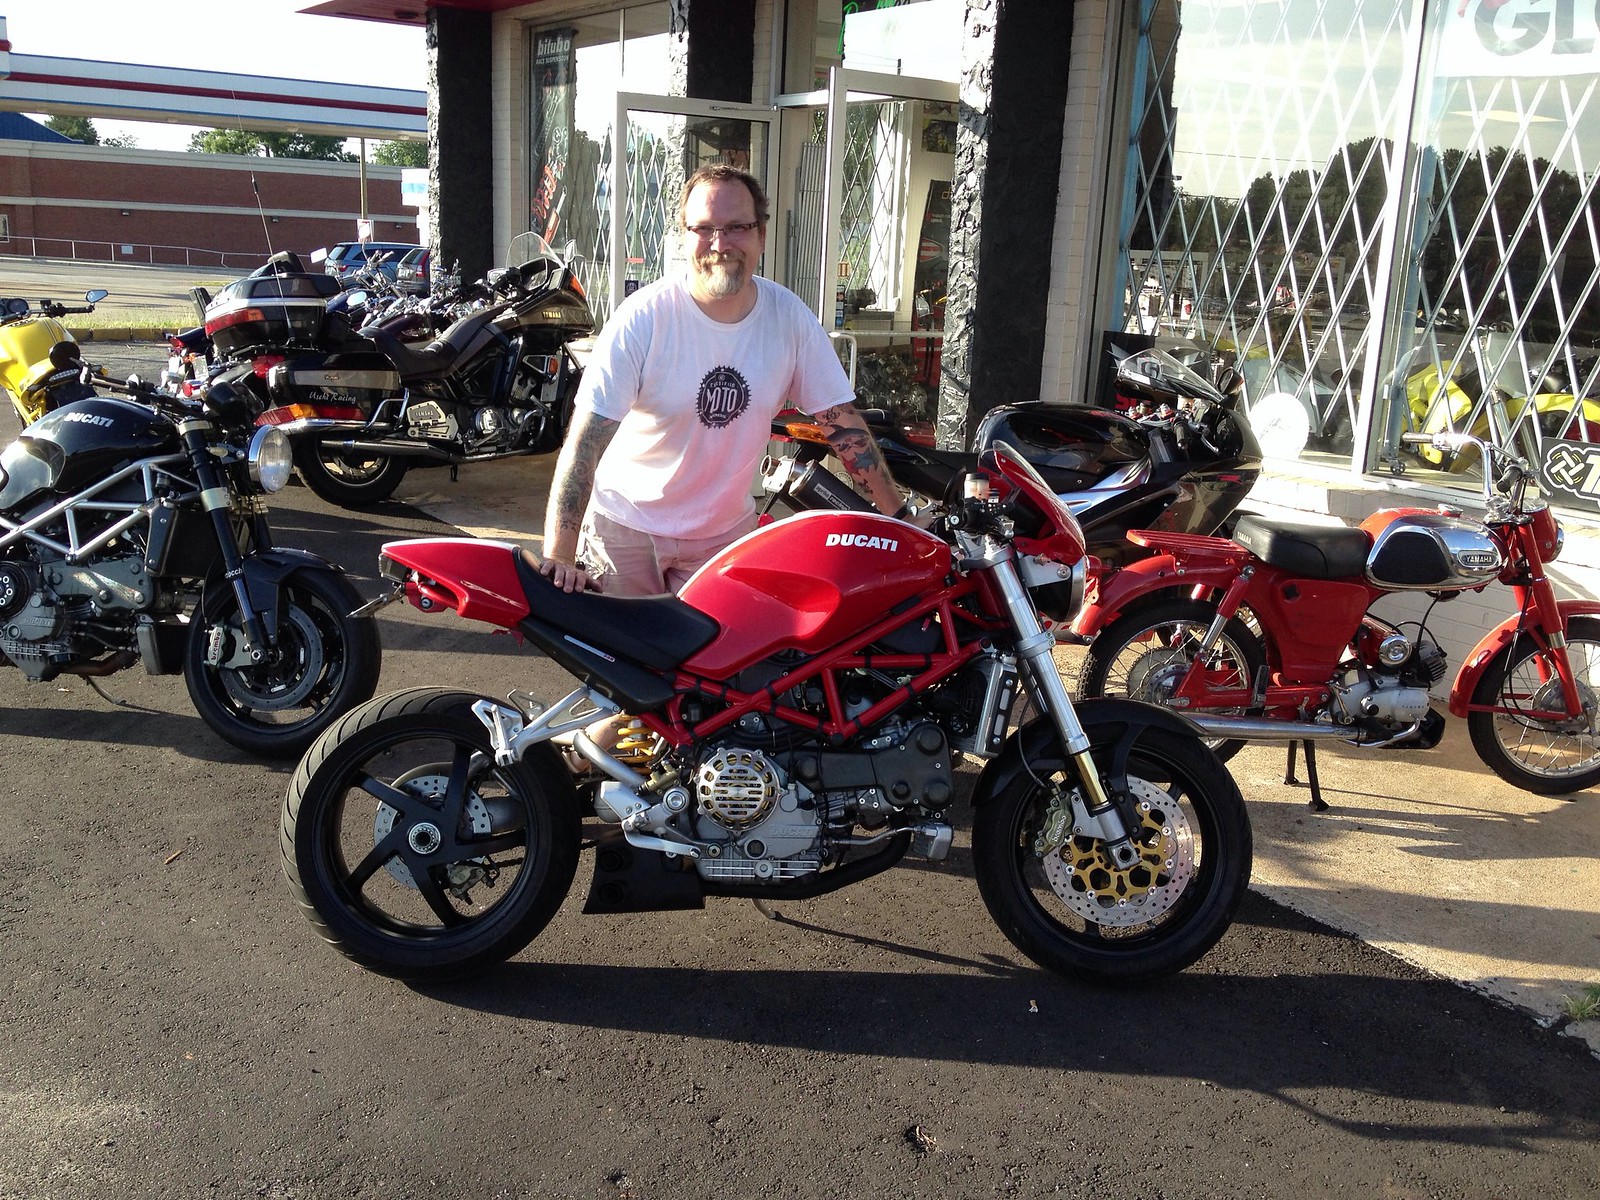 Bikes of the DML - Page 5 - Ducati Monster Forums: Ducati 